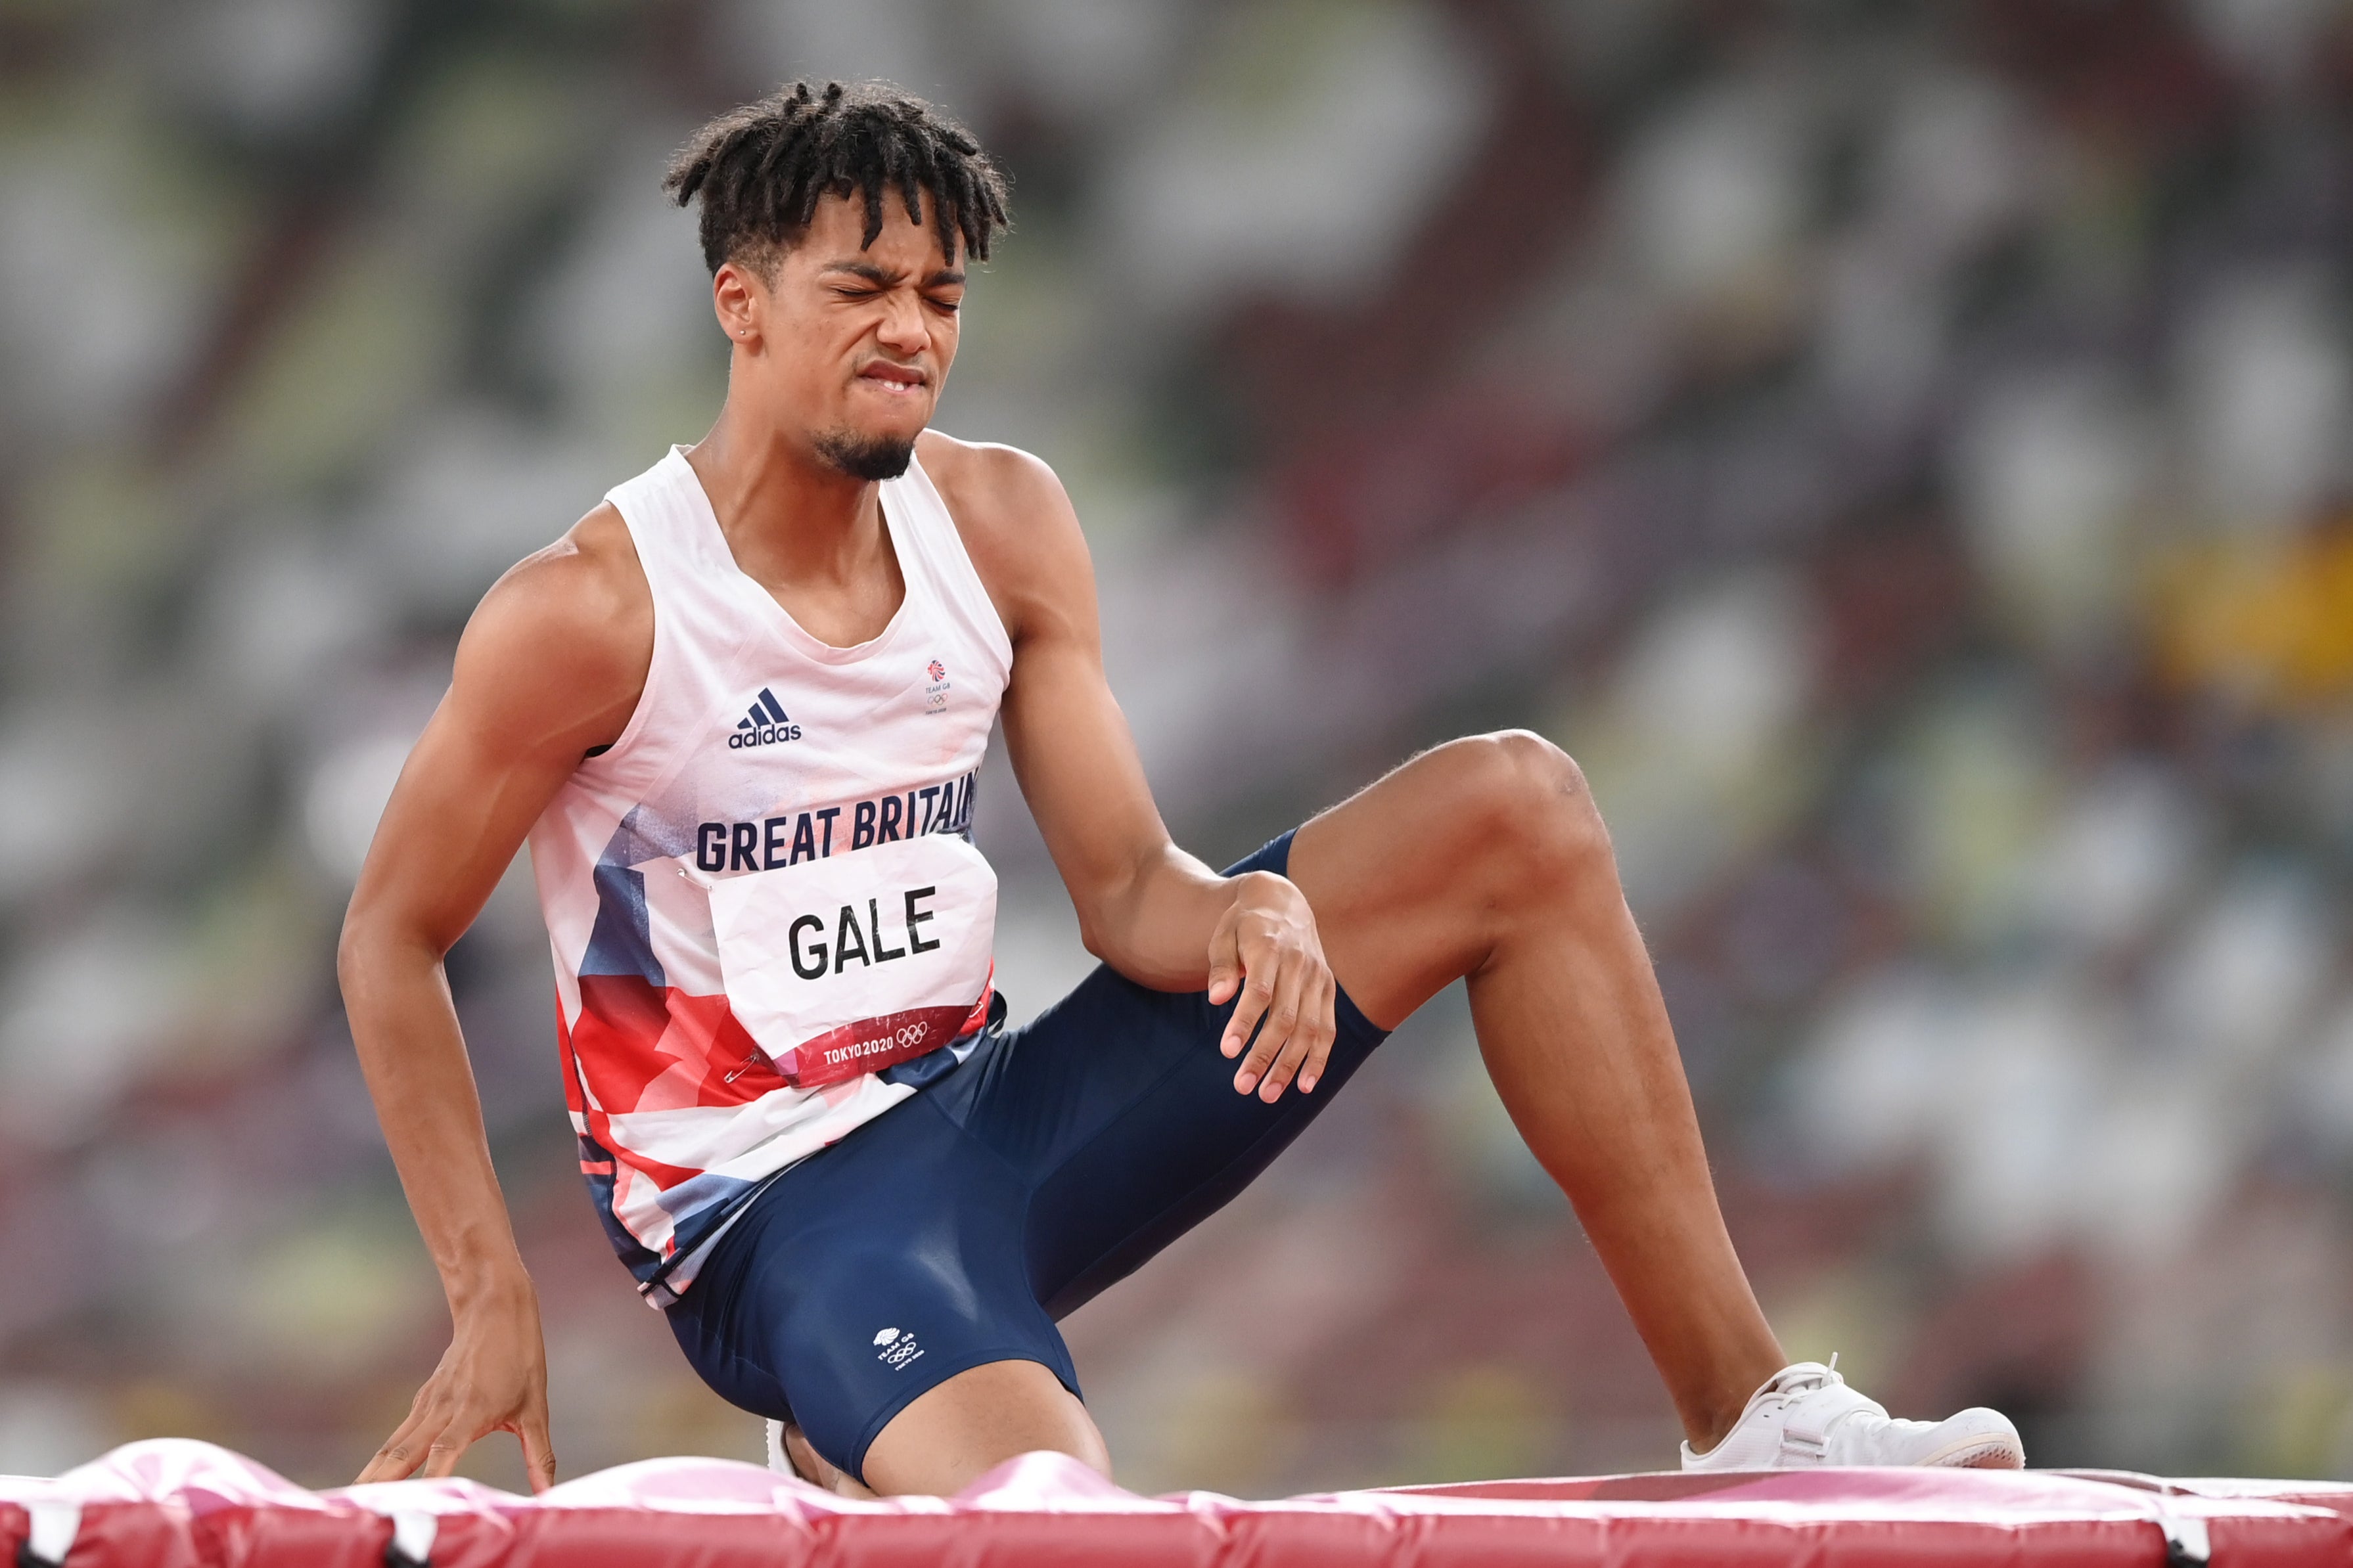 Tom Gale reached the Olympic high jump final at Tokyo 2020 but things turned sour afterwards